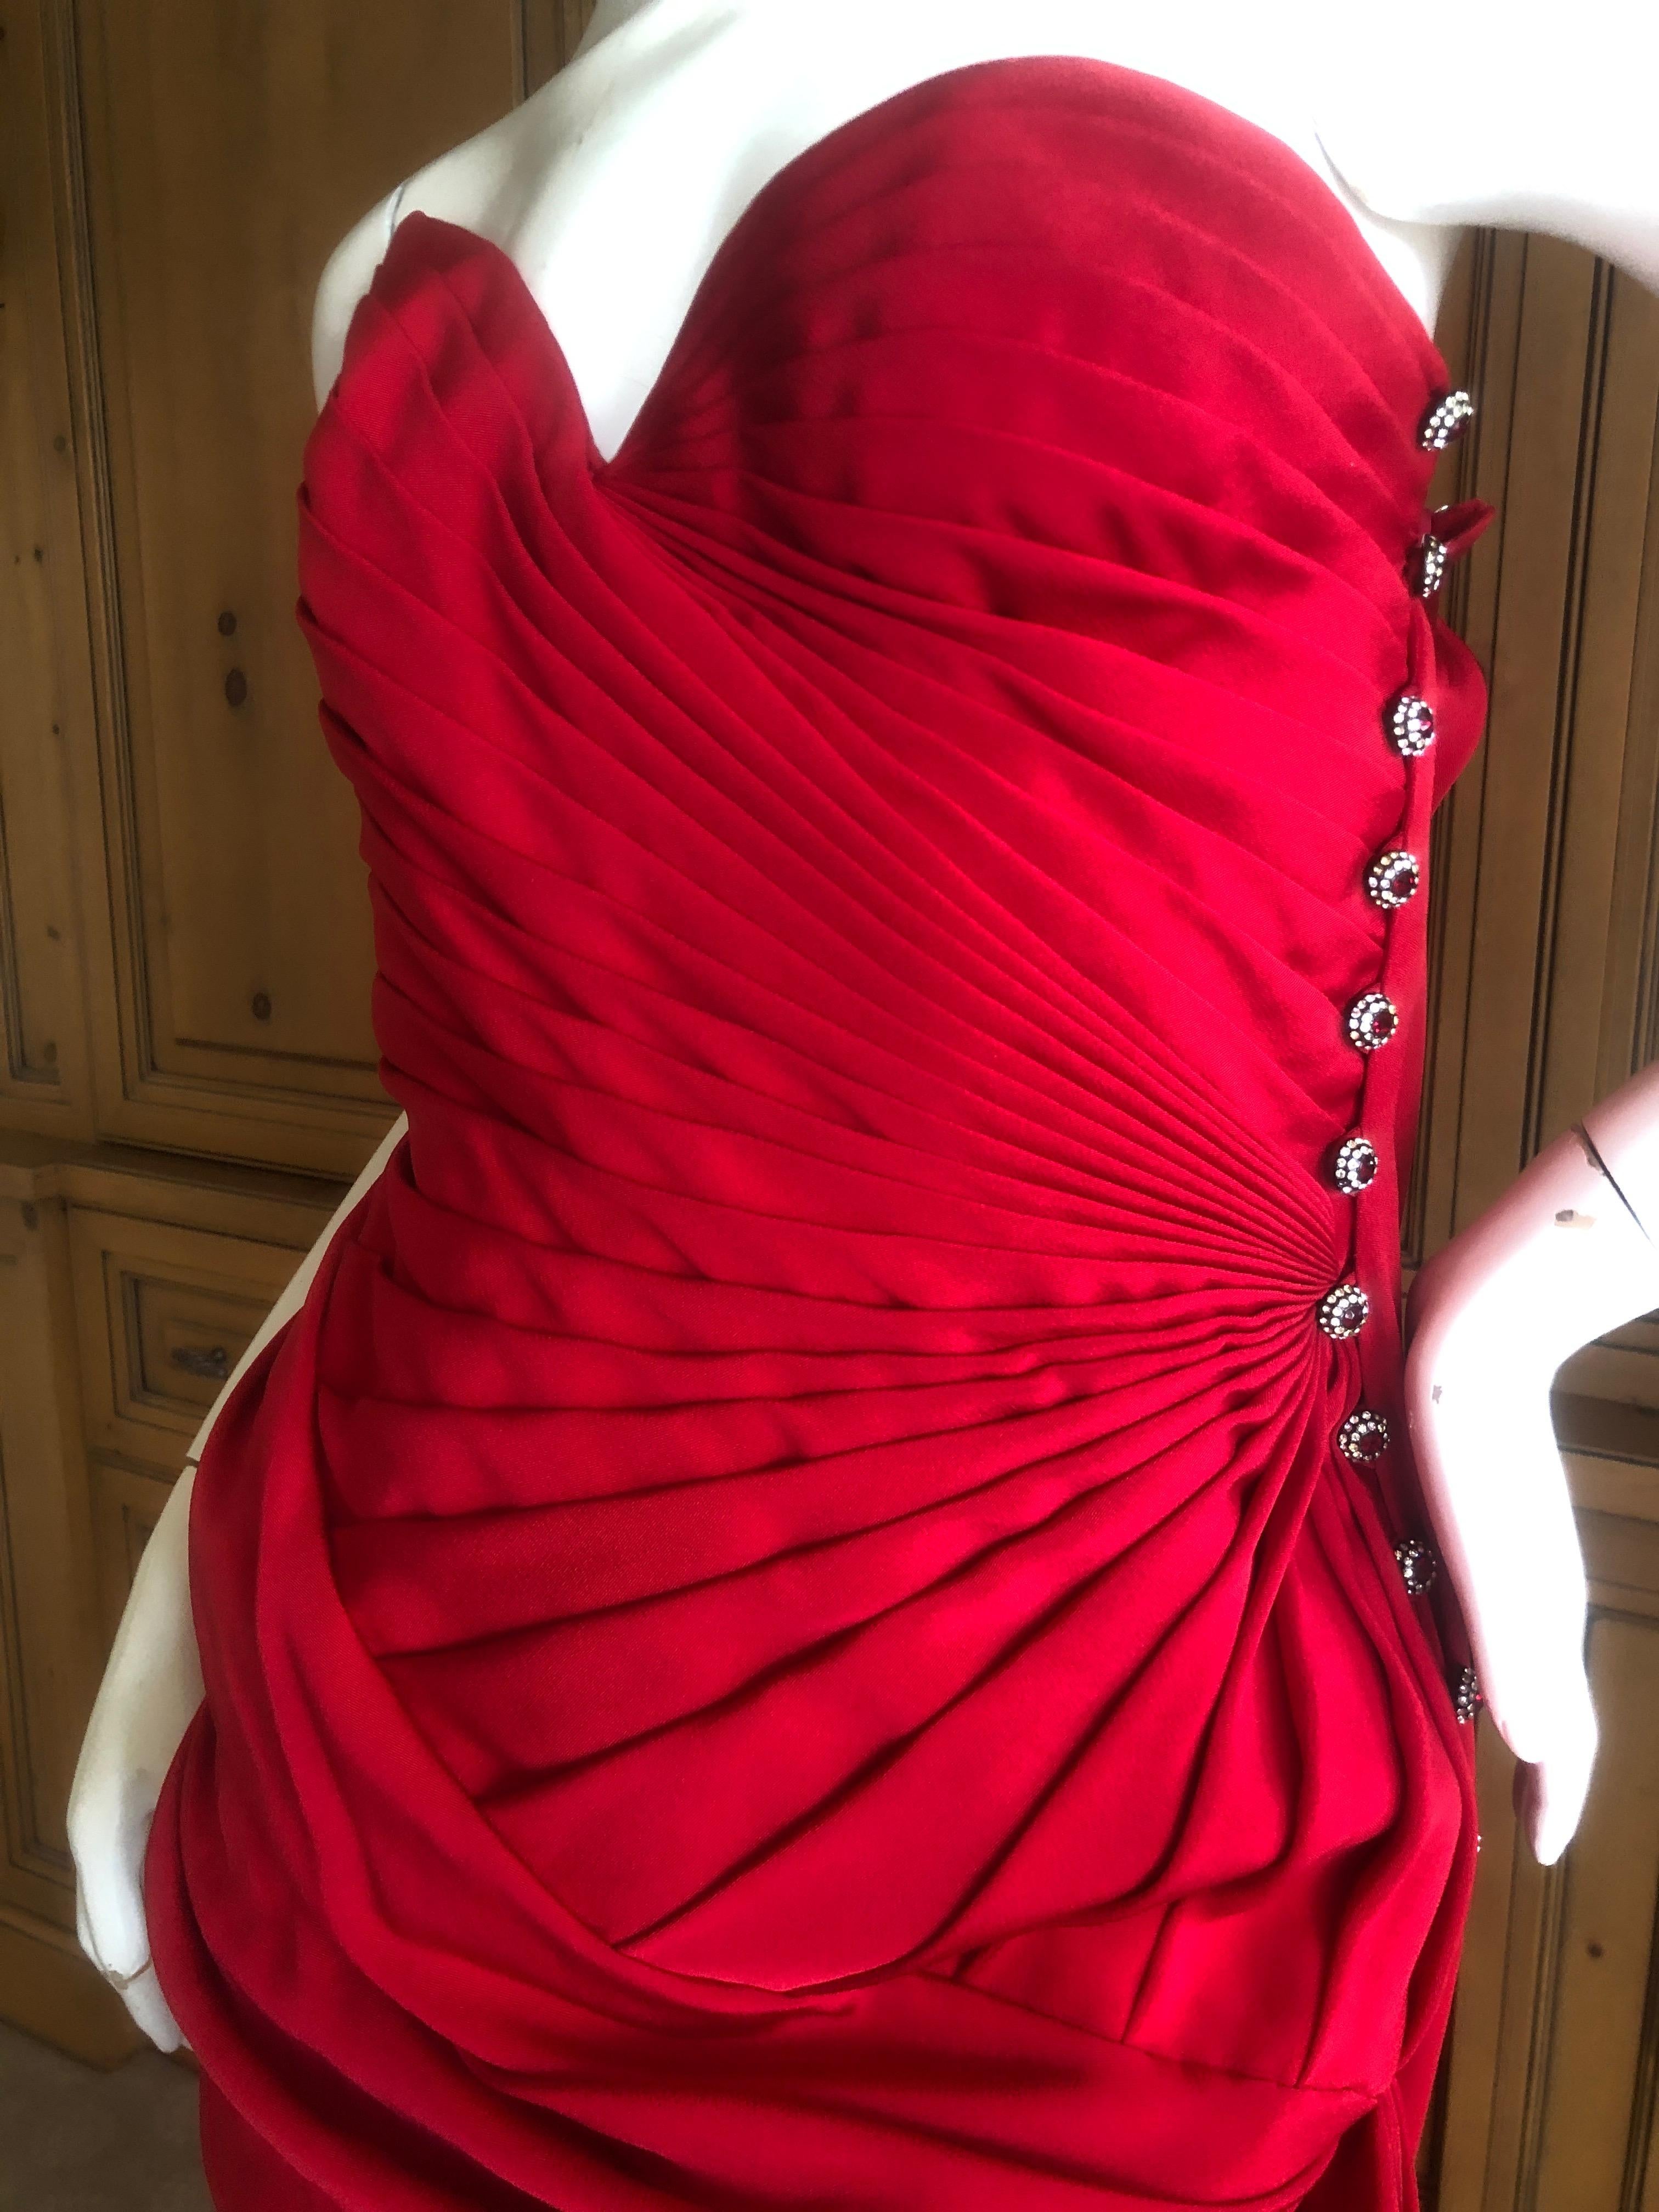 Emanuel Ungaro Numbered Haute Couture Fall 1984 Red  Strapless Evening Dress 2